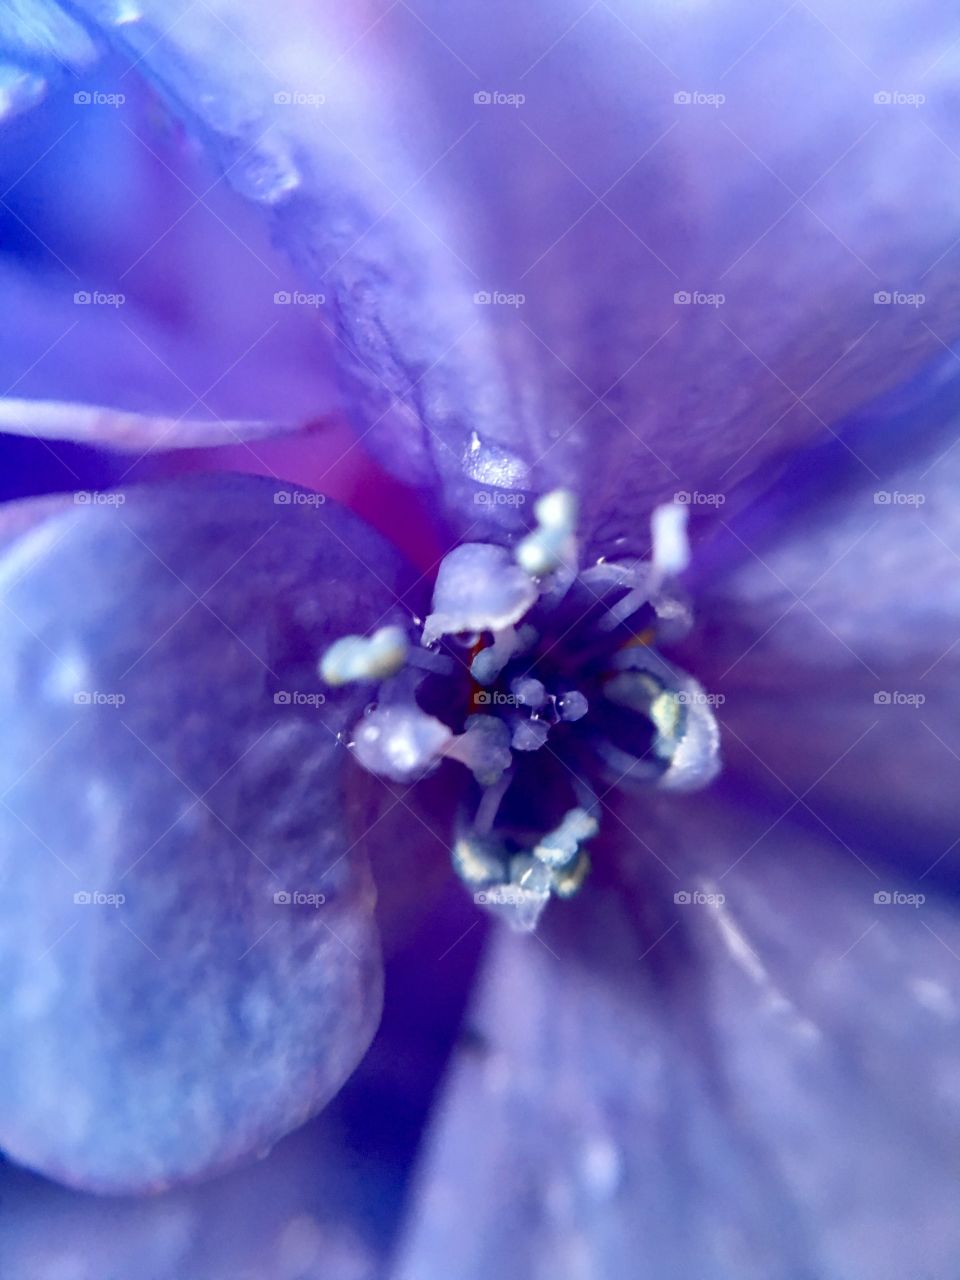 Raindrops on the pistil  and stamen of a purple flower.